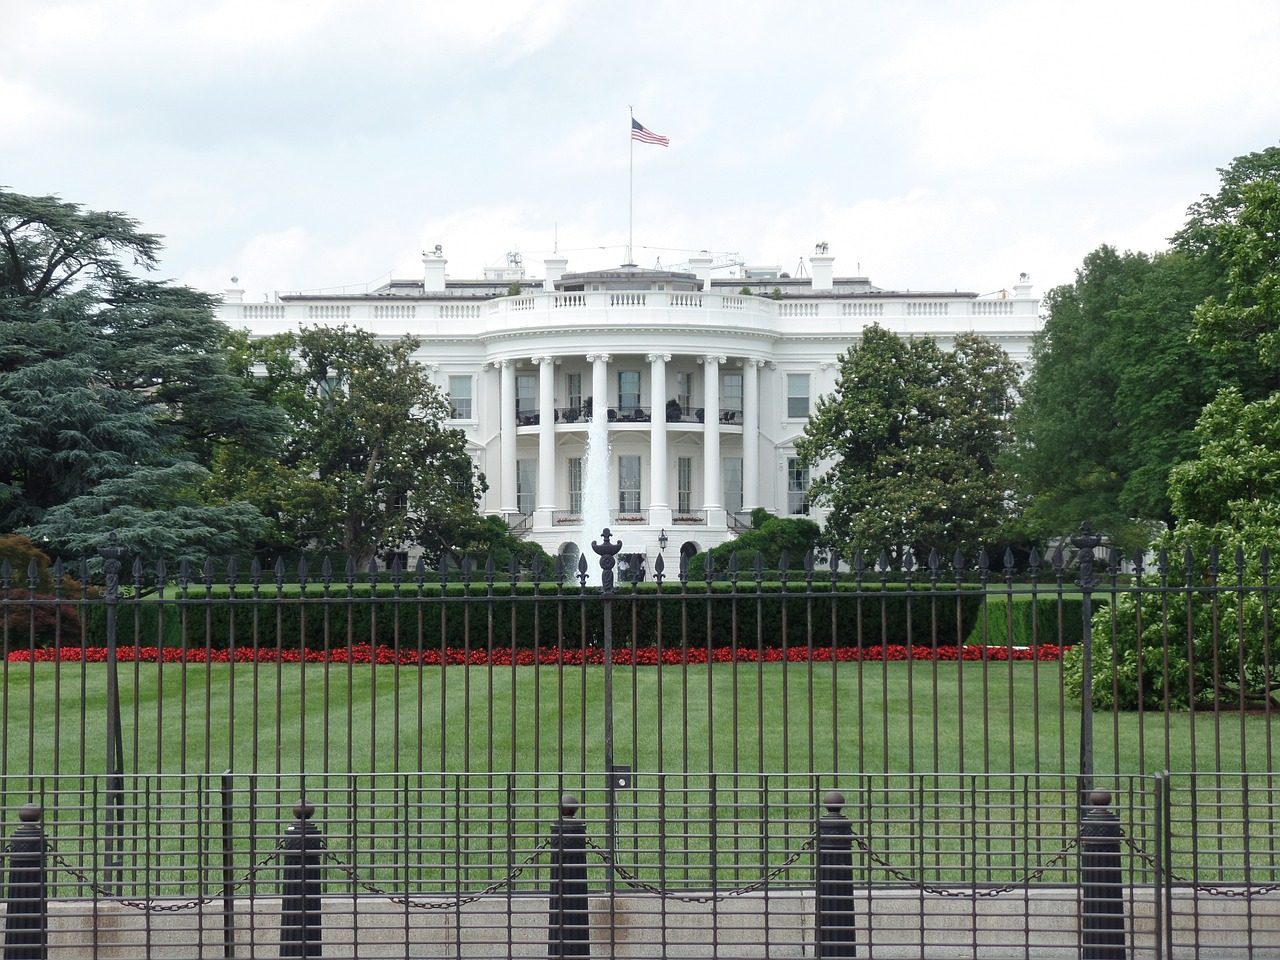 The White House front area picture